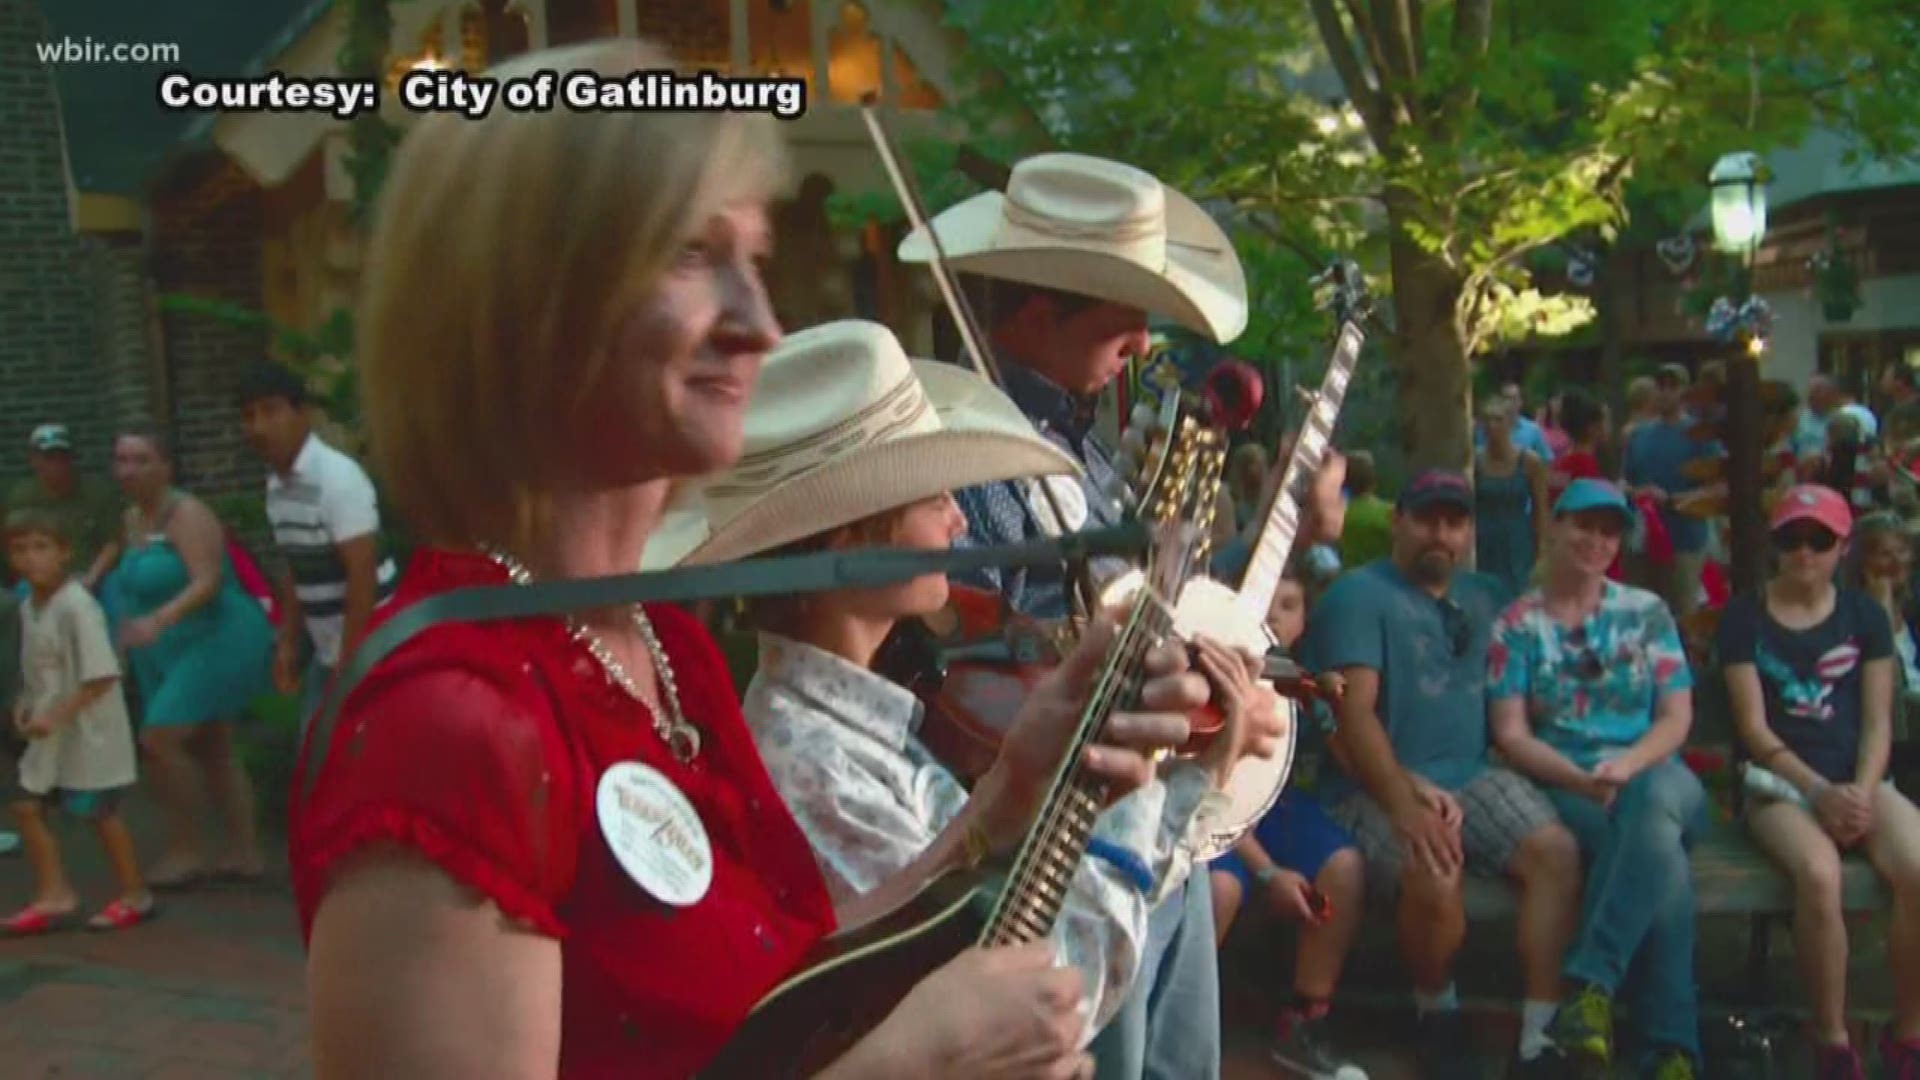 Smoky Mountain Tunes & Tales returns to Gatlinburg for the fourteenth  year.  Daily performances will be from 6 p.m. to 11 p.m. Musicians, singers, character actors and dancers will fill the streets daily. Visit gatlinburg.com for more information. June 19, 2019-4pm.